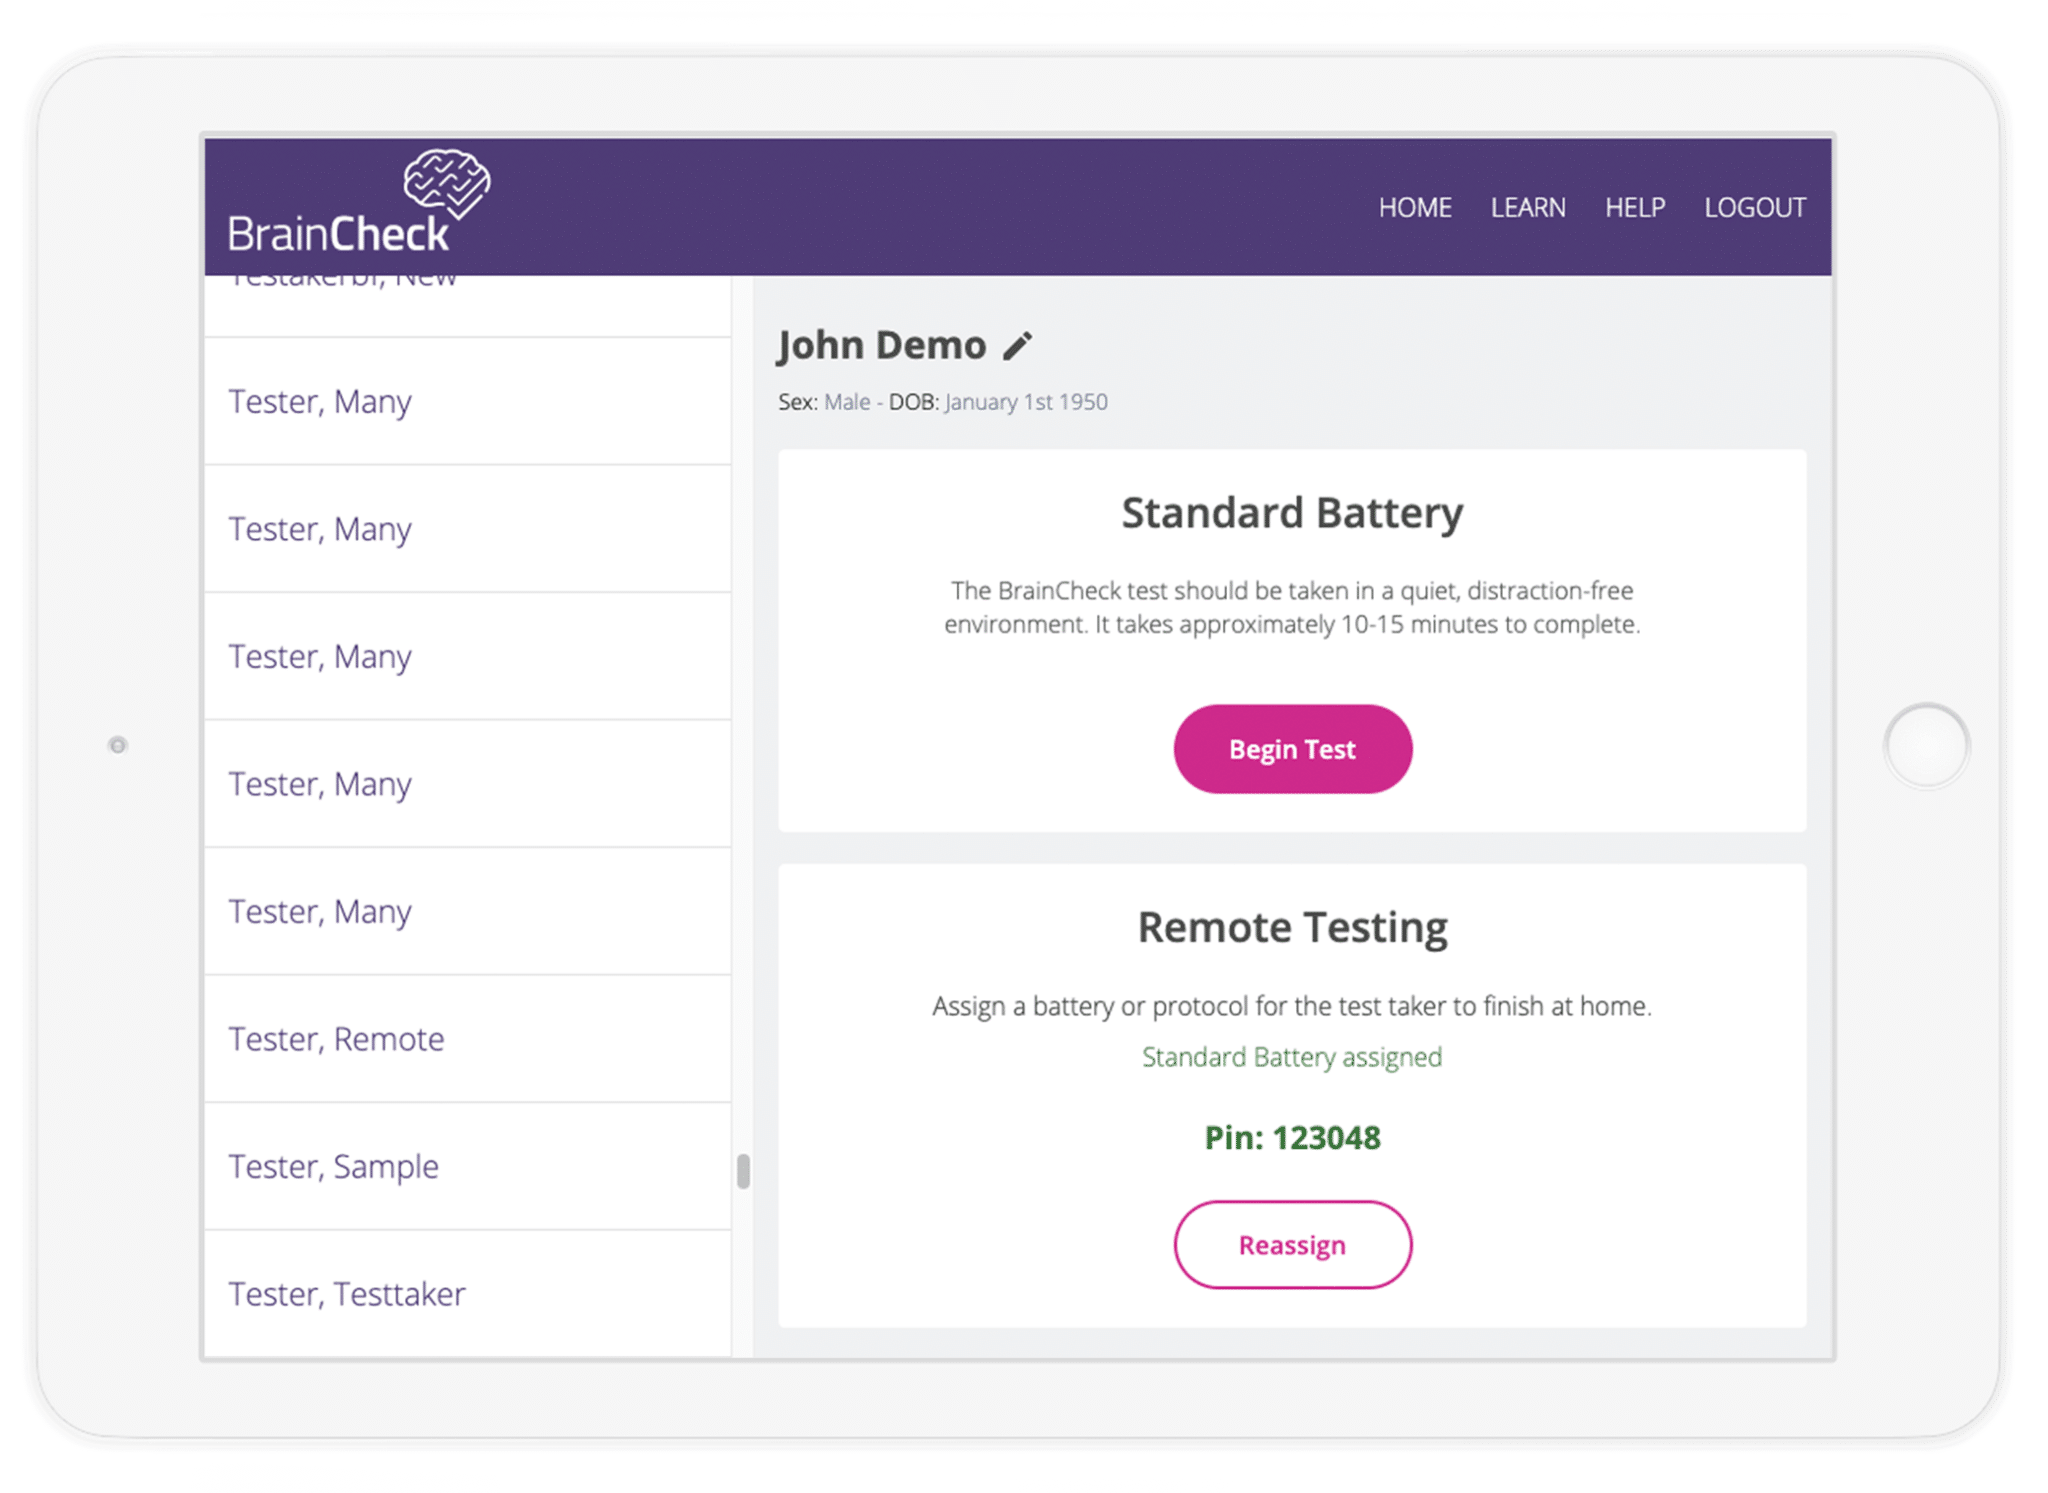 Assess Patients from Anywhere with Remote Testing